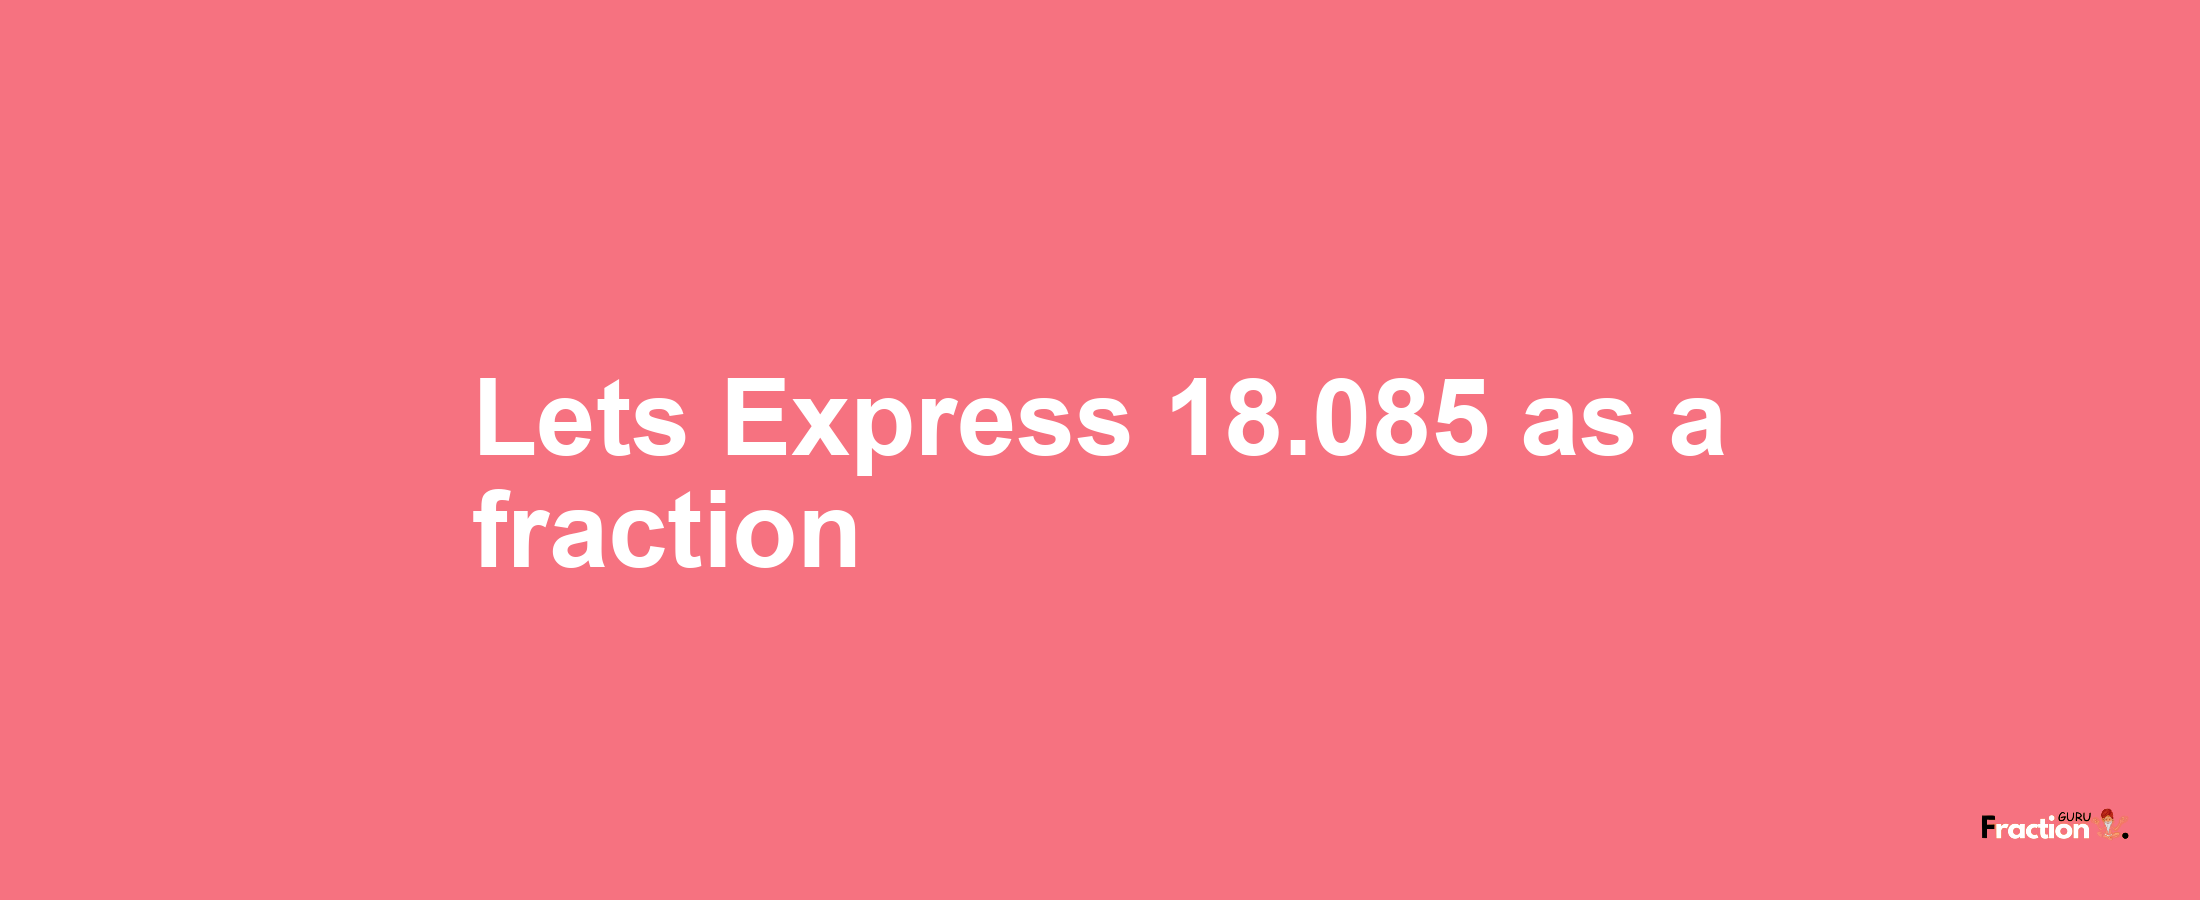 Lets Express 18.085 as afraction